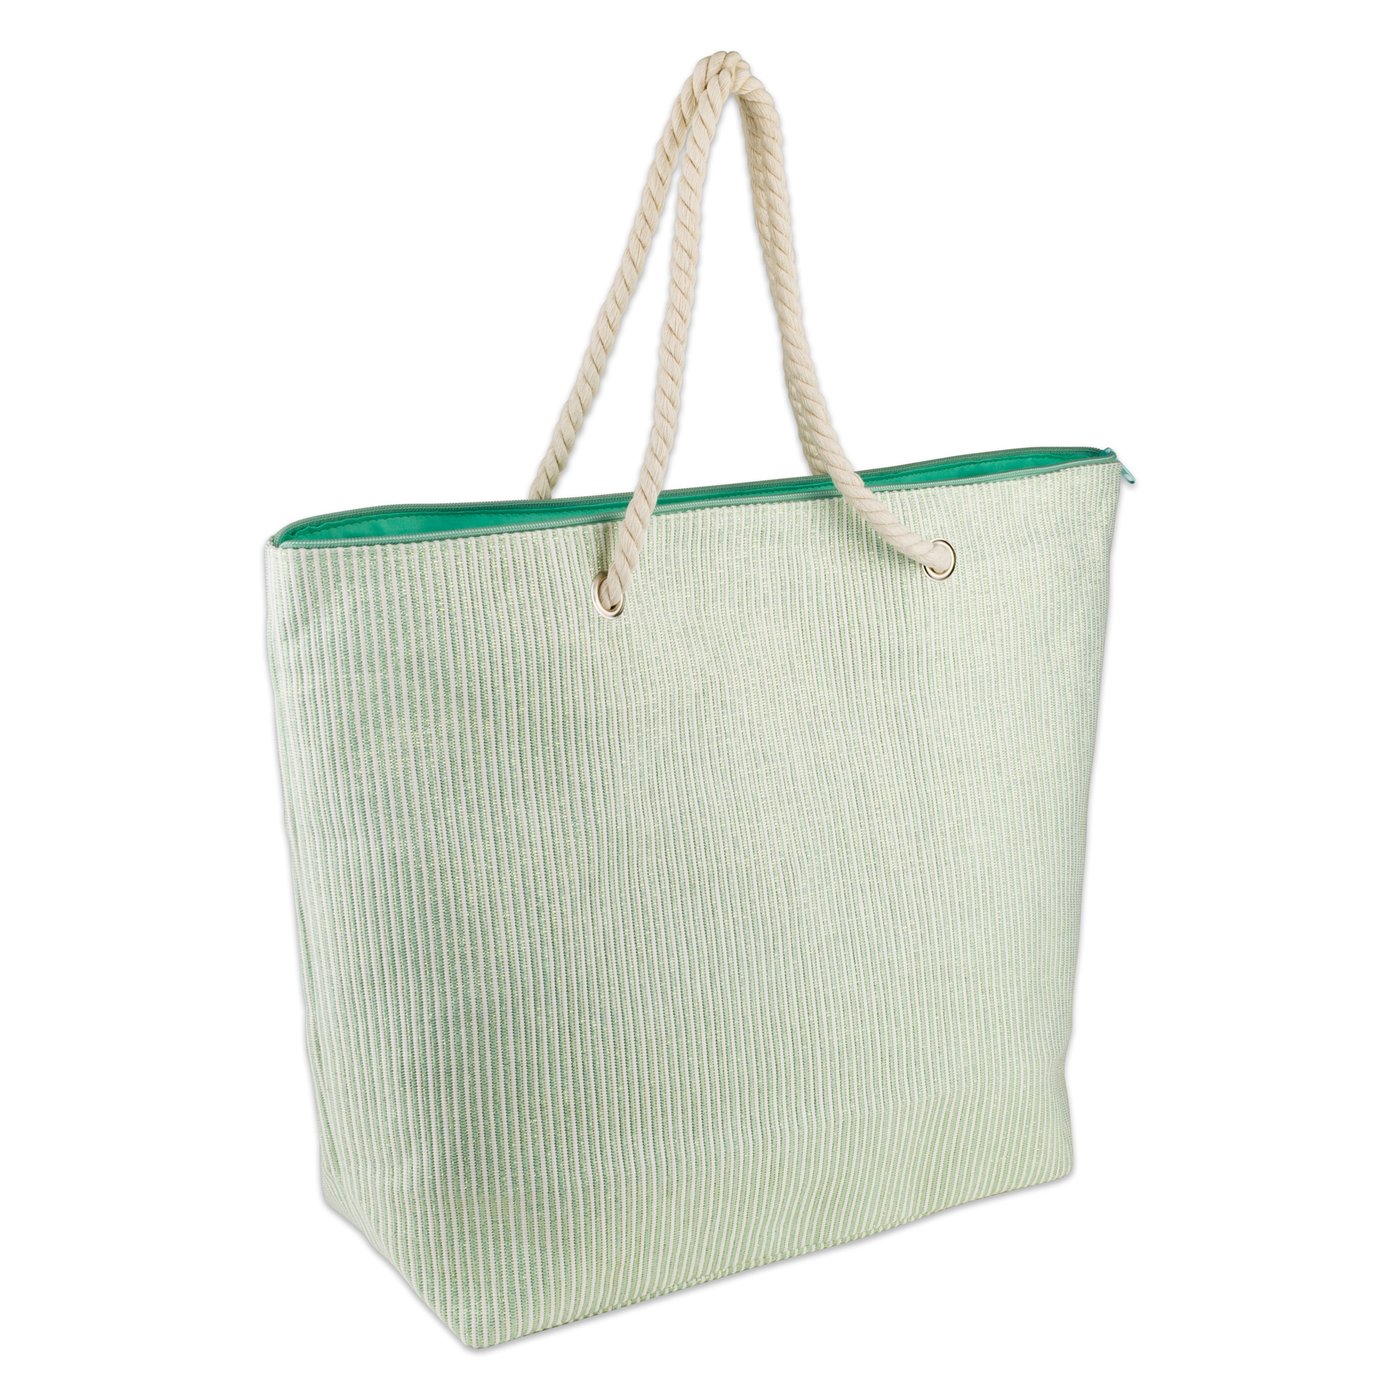 Shimmery Green Striped Woven Paper Beach TOTE BAG